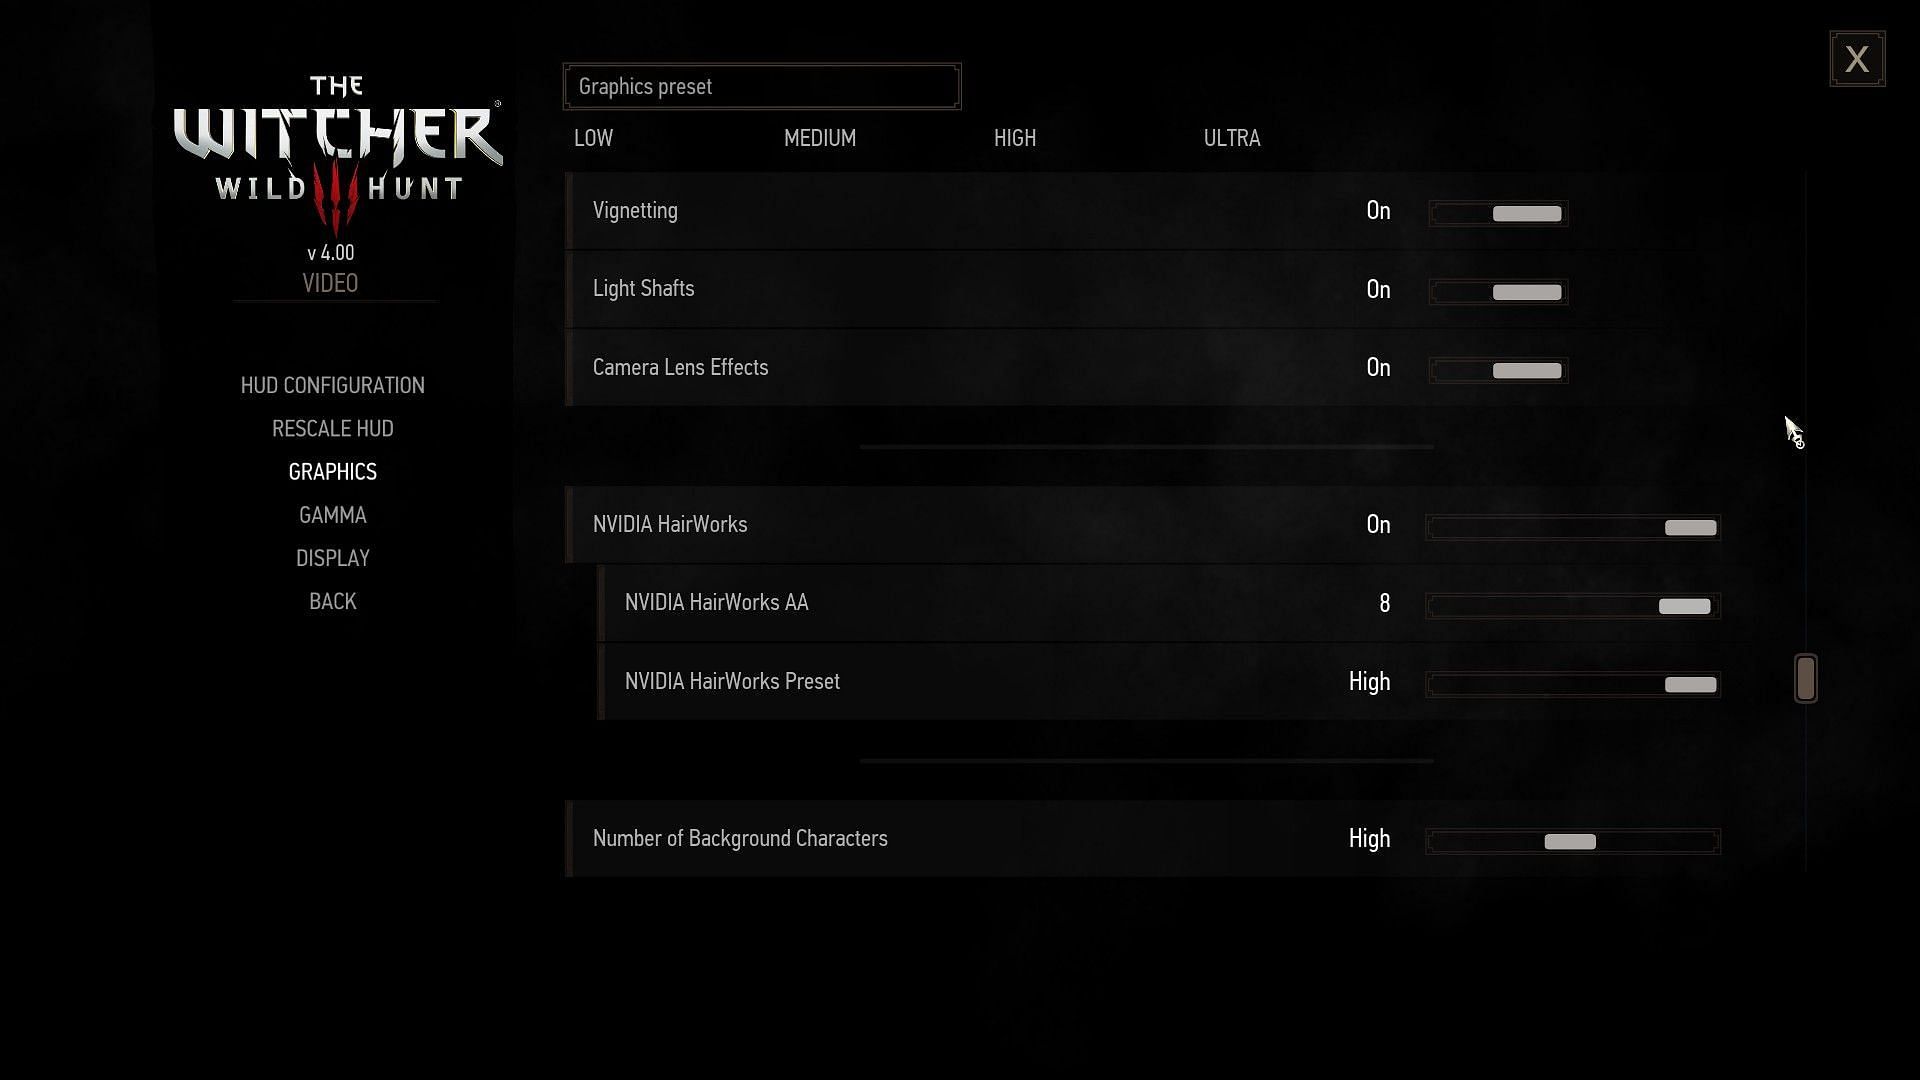 Nvidia HairWorks option in The Witcher 3 (Image via CD Projekt Red)